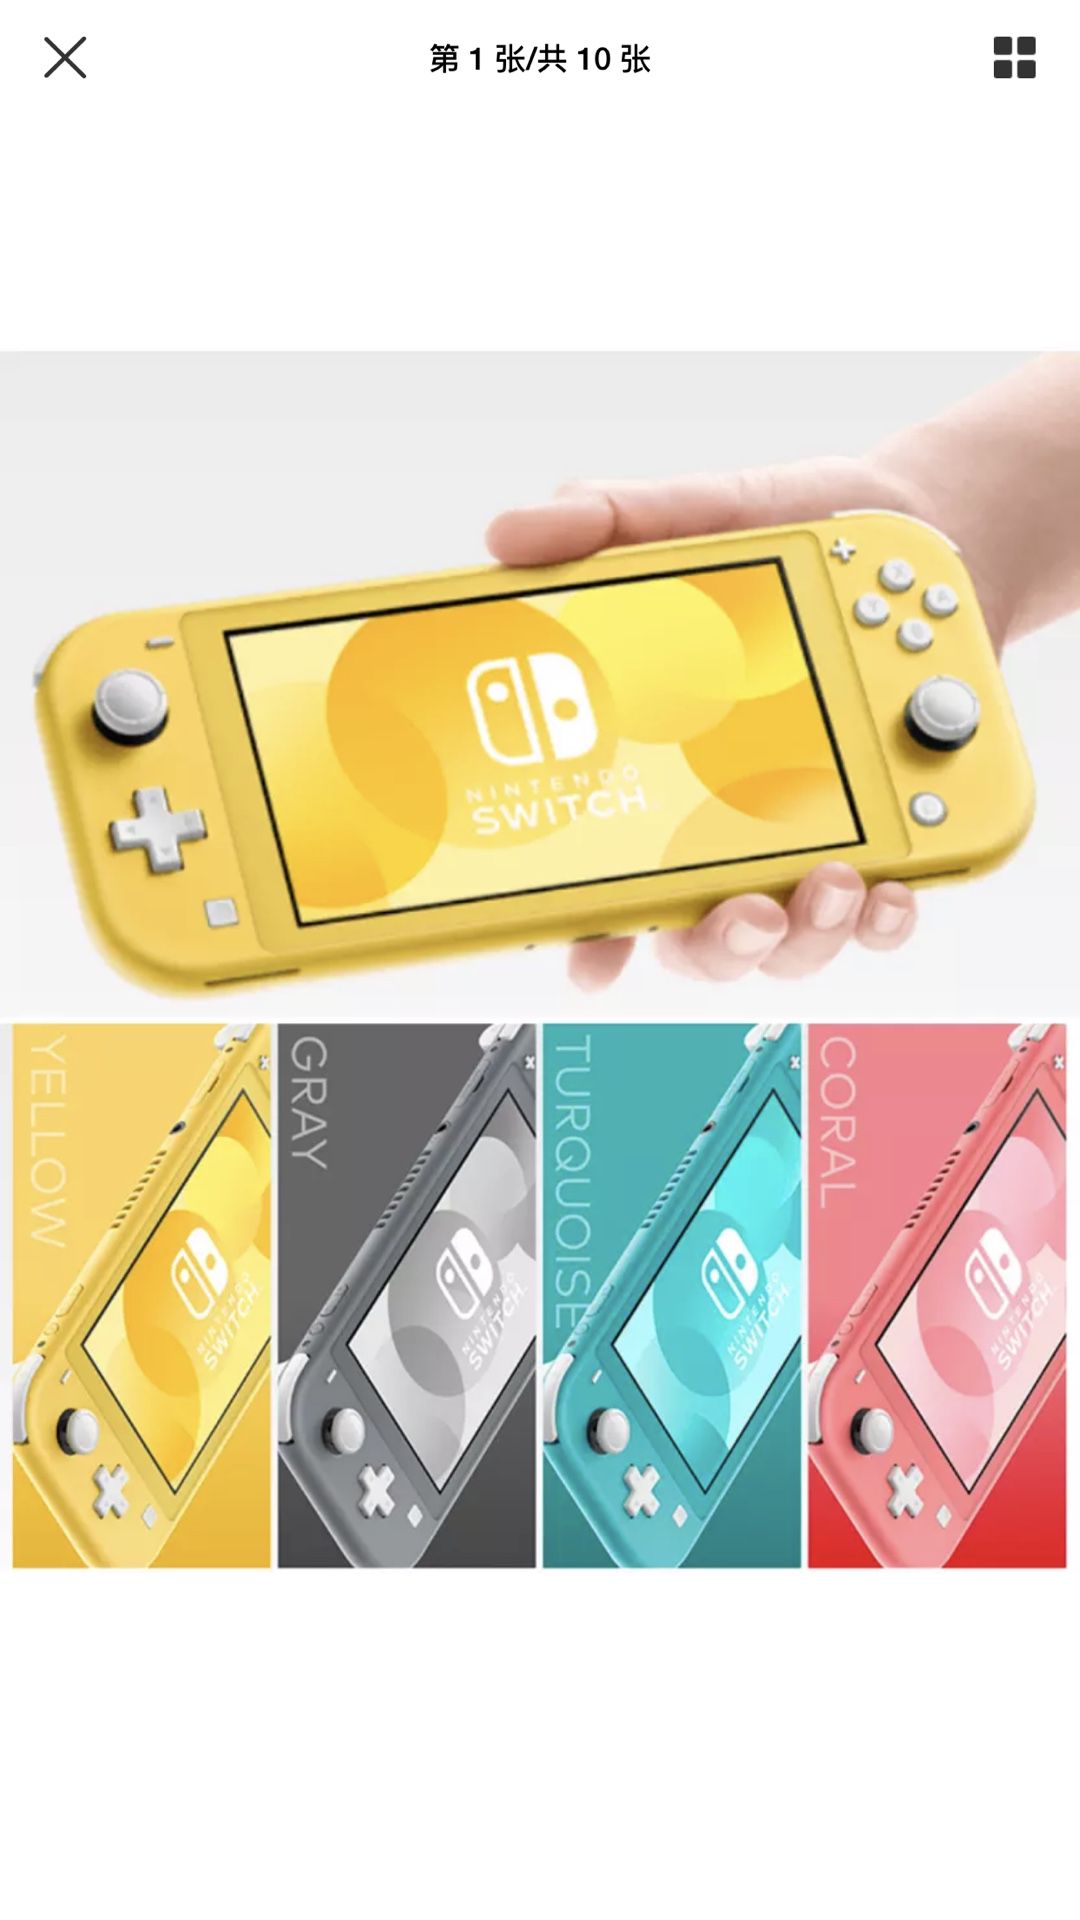 Nintendo Switch Lite Handheld Console 32GB - Turquoise - New - In Stock Now!